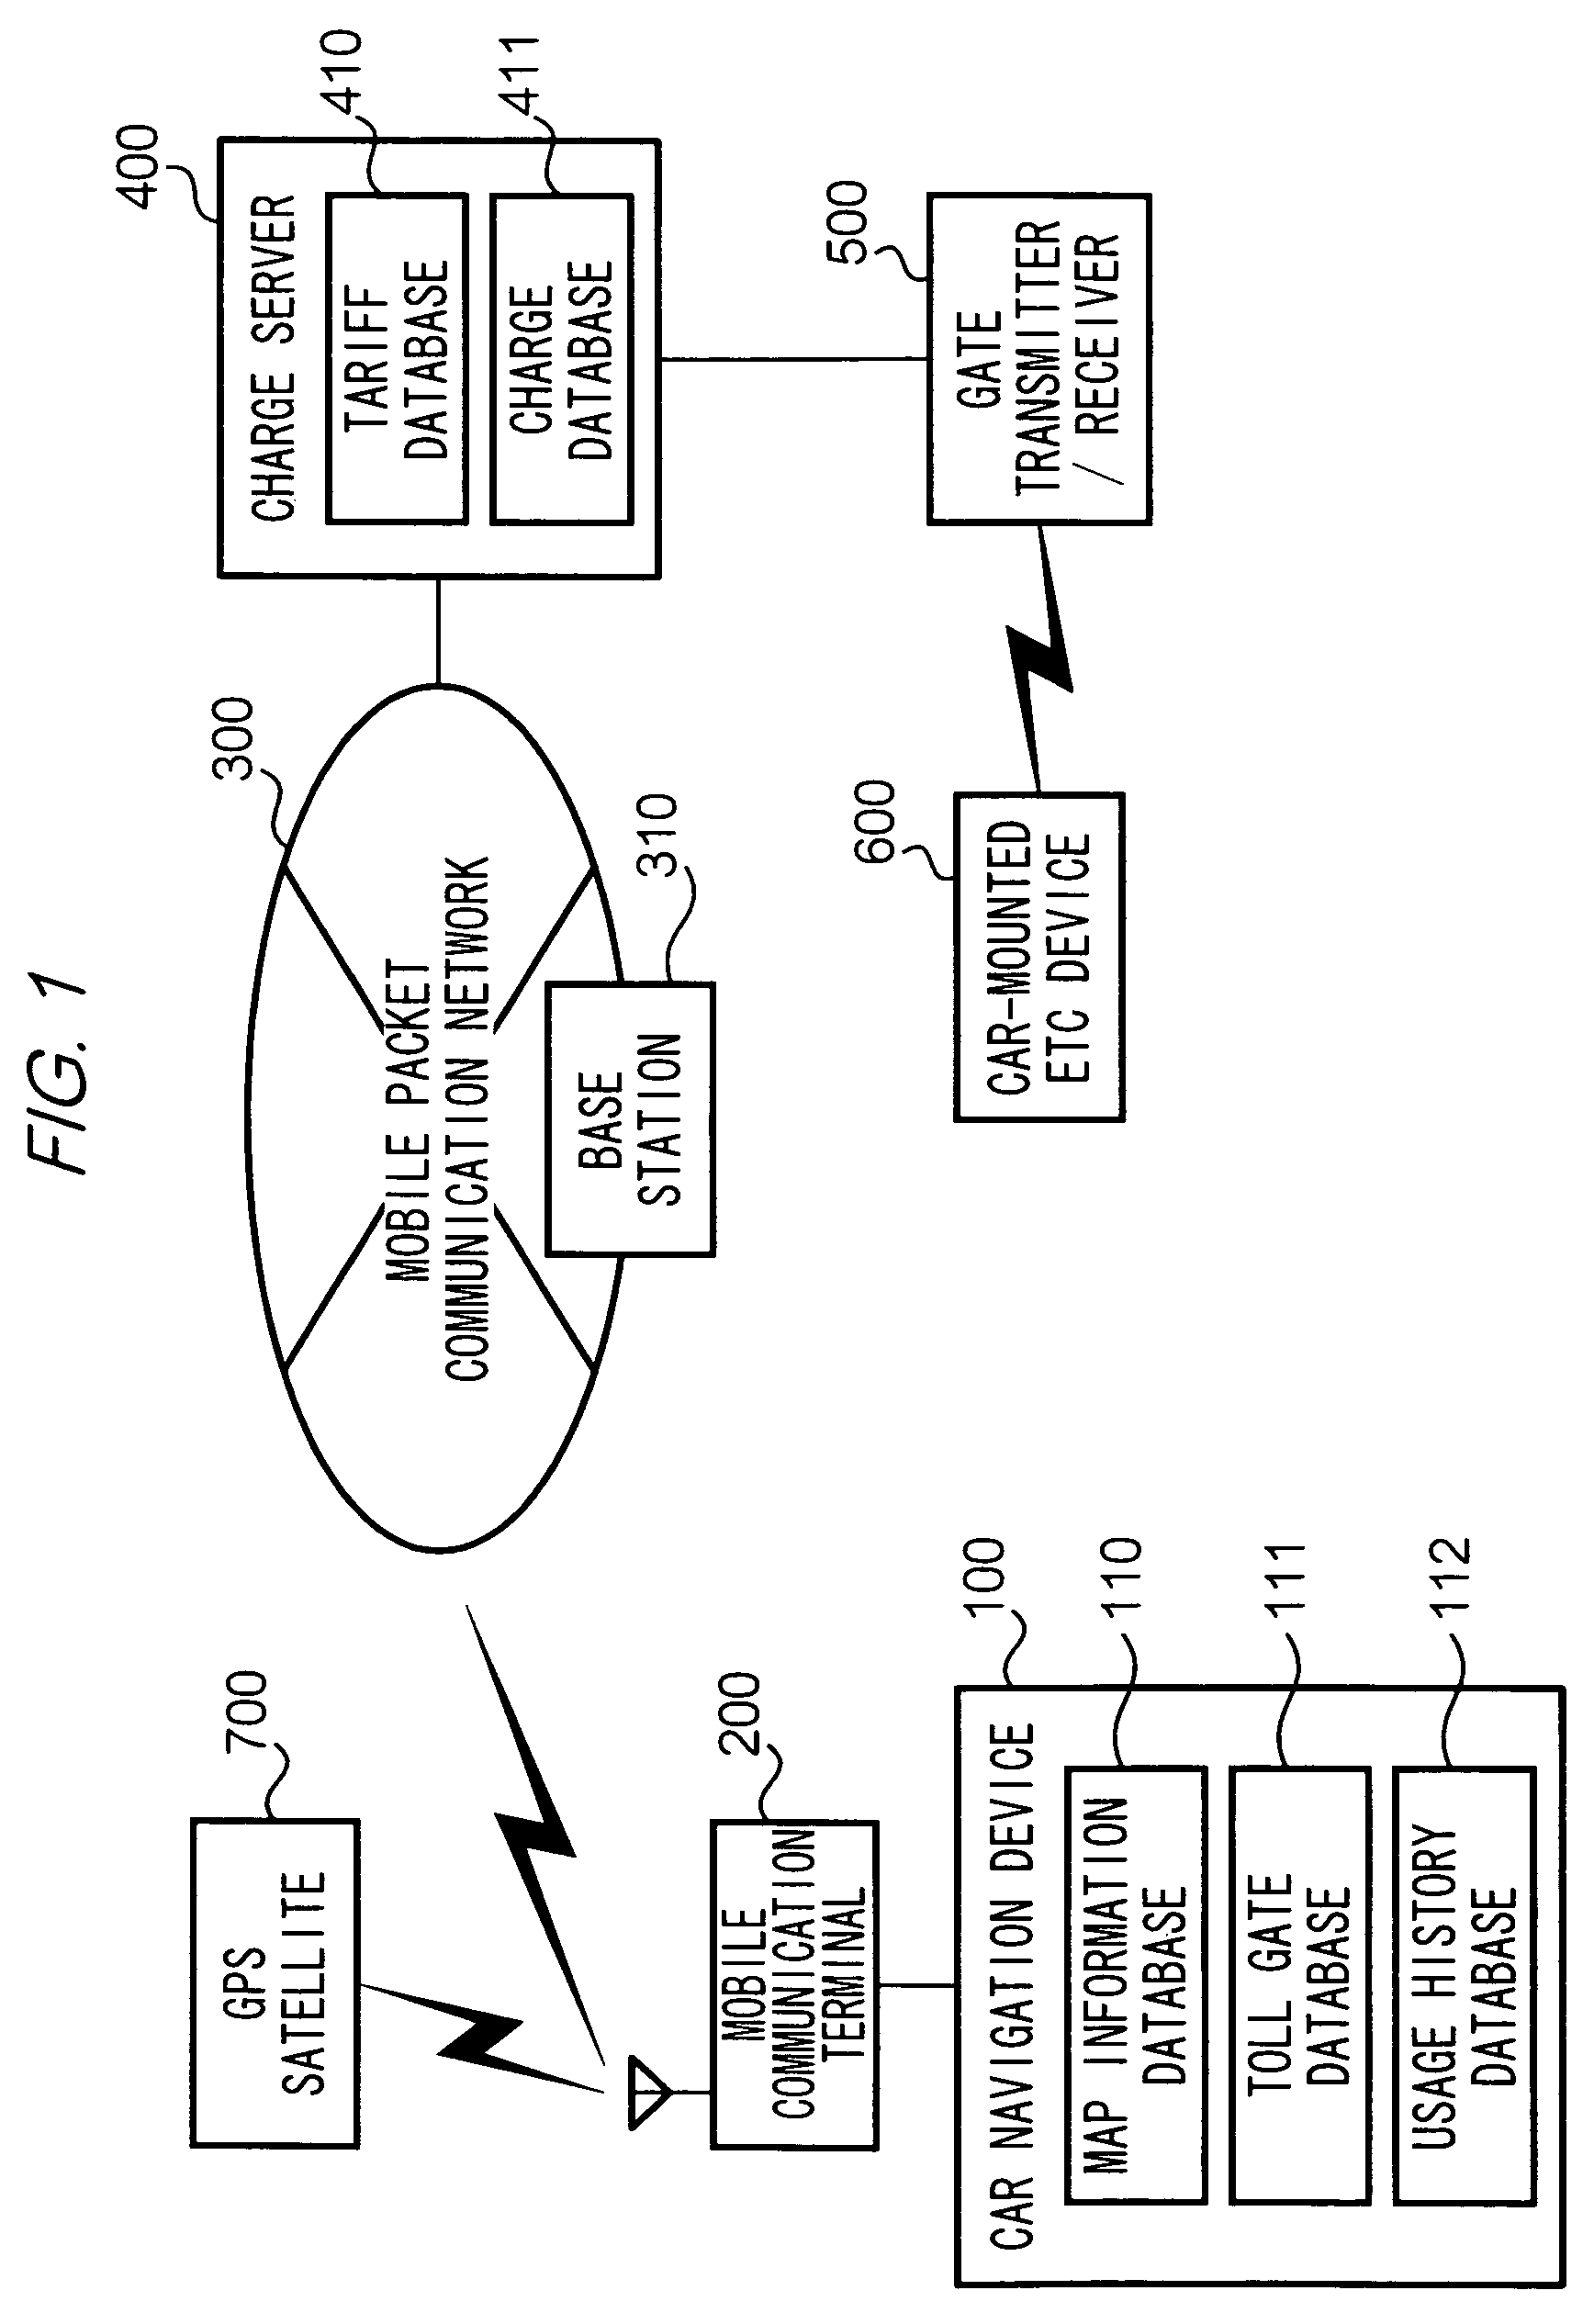 System for notifying toll charge information